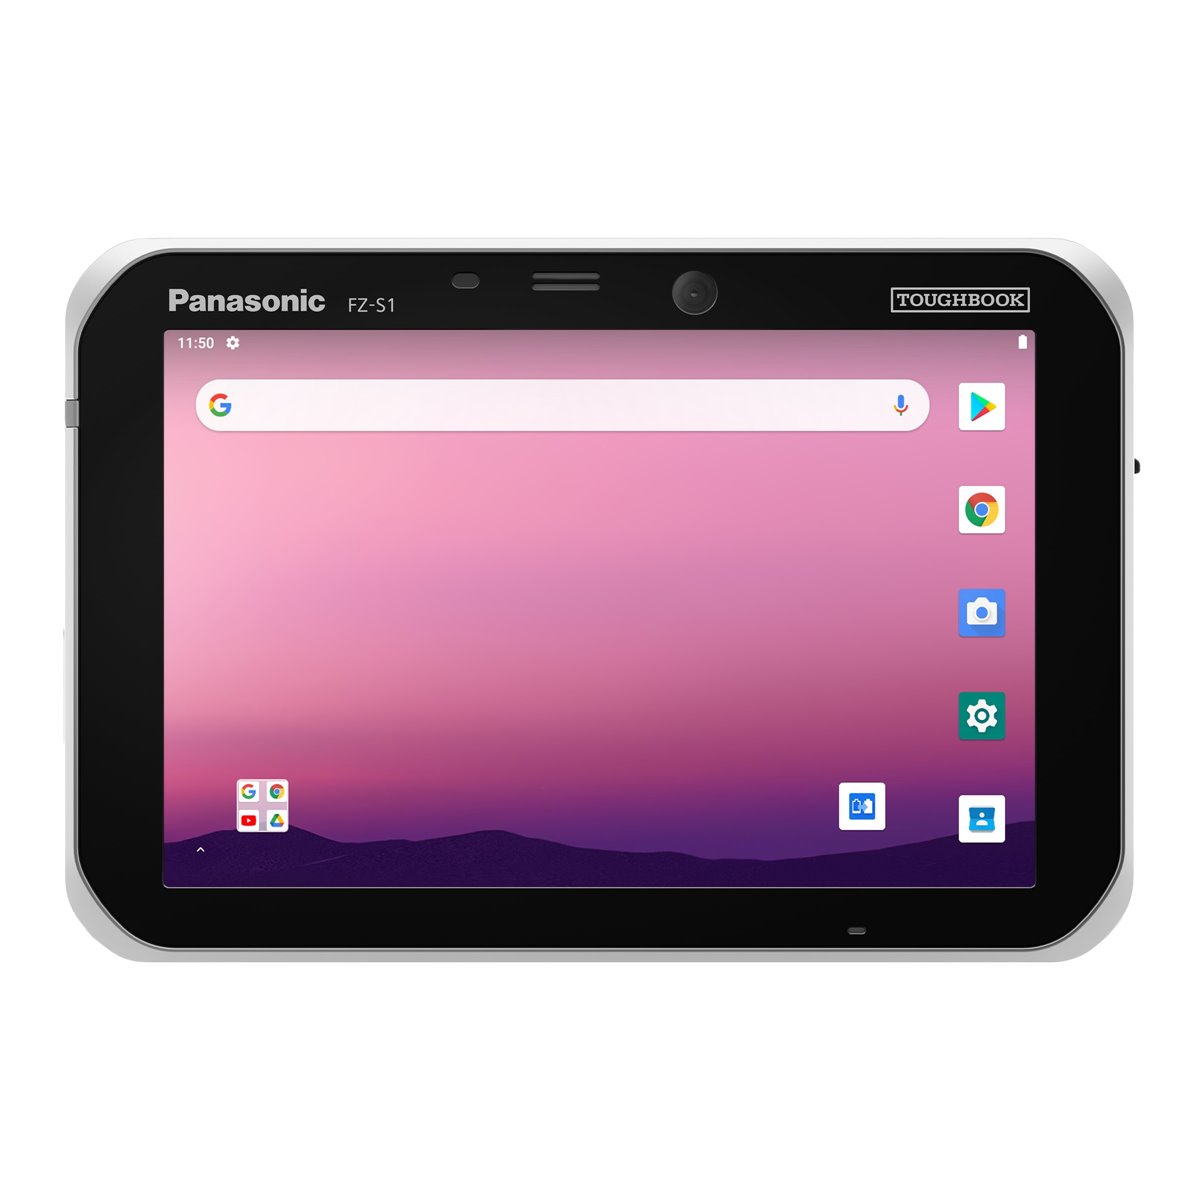 Panasonic Toughbook S1 - Tablet - robust - Android 11 - 64 GB eMMC - 17.8 cm - Tablet - 2.2 GHz